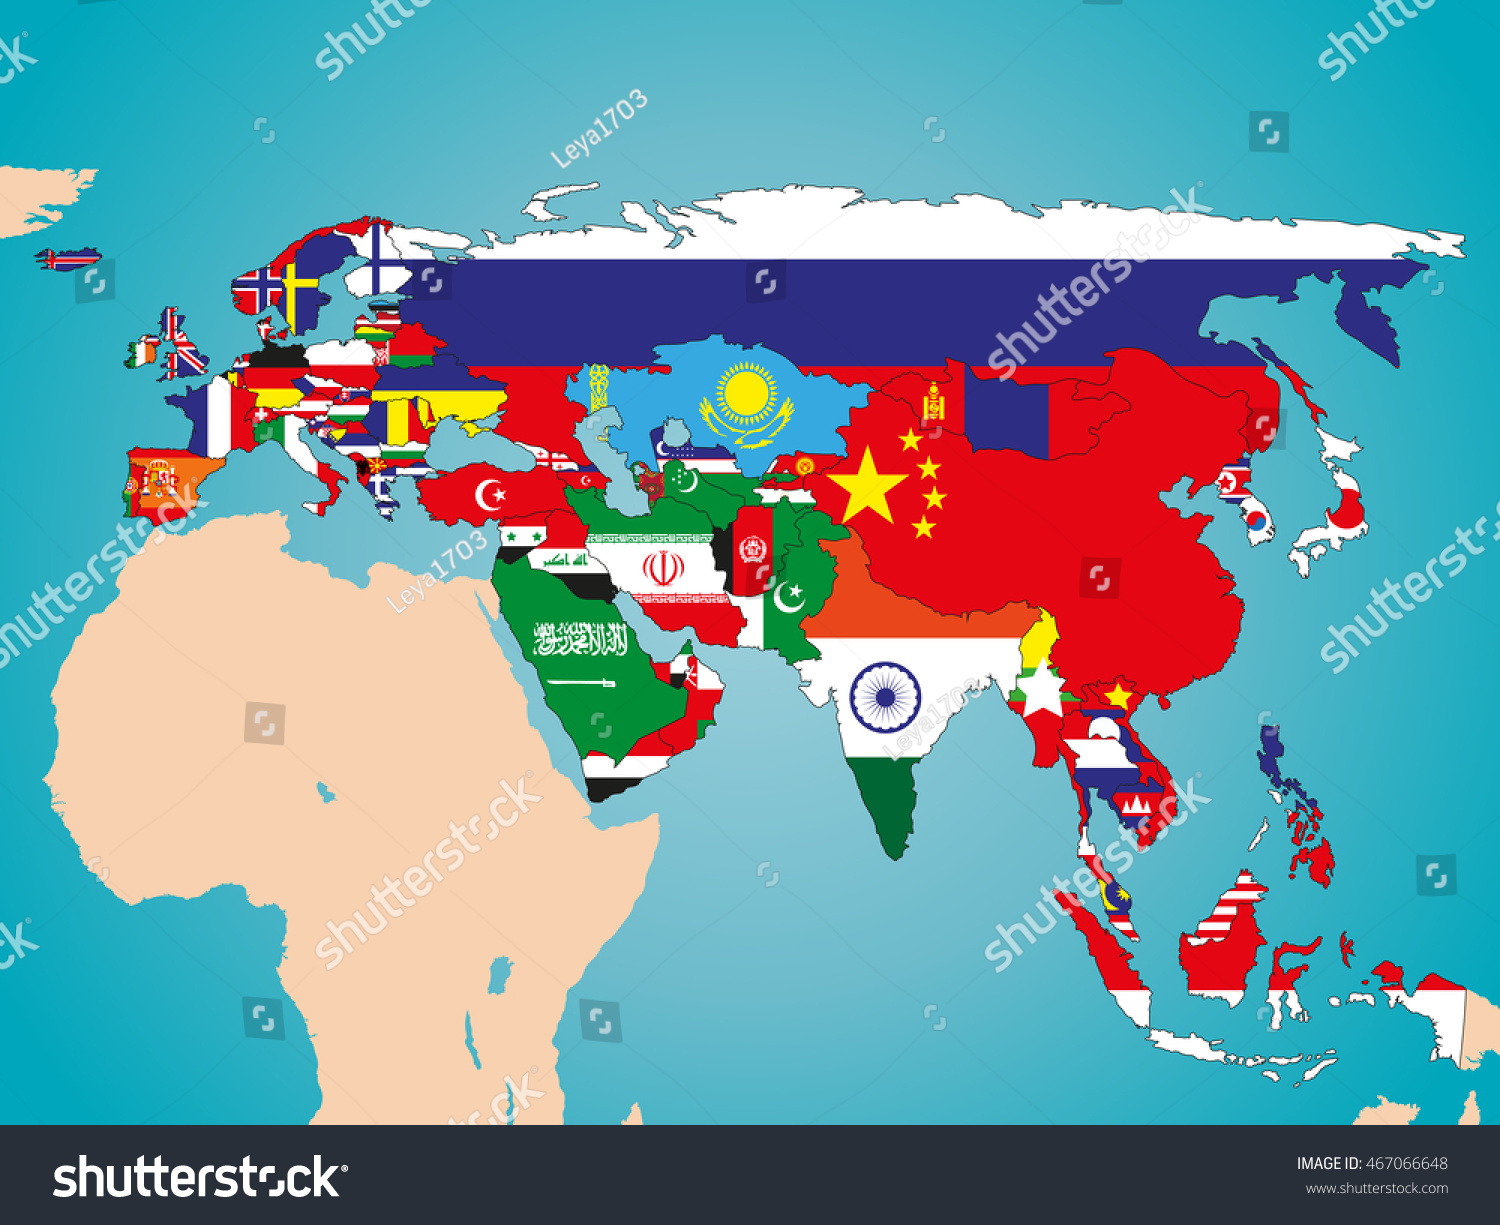 Stock Vector Political Map Of Eurasia With The Flags Of States 467066648 